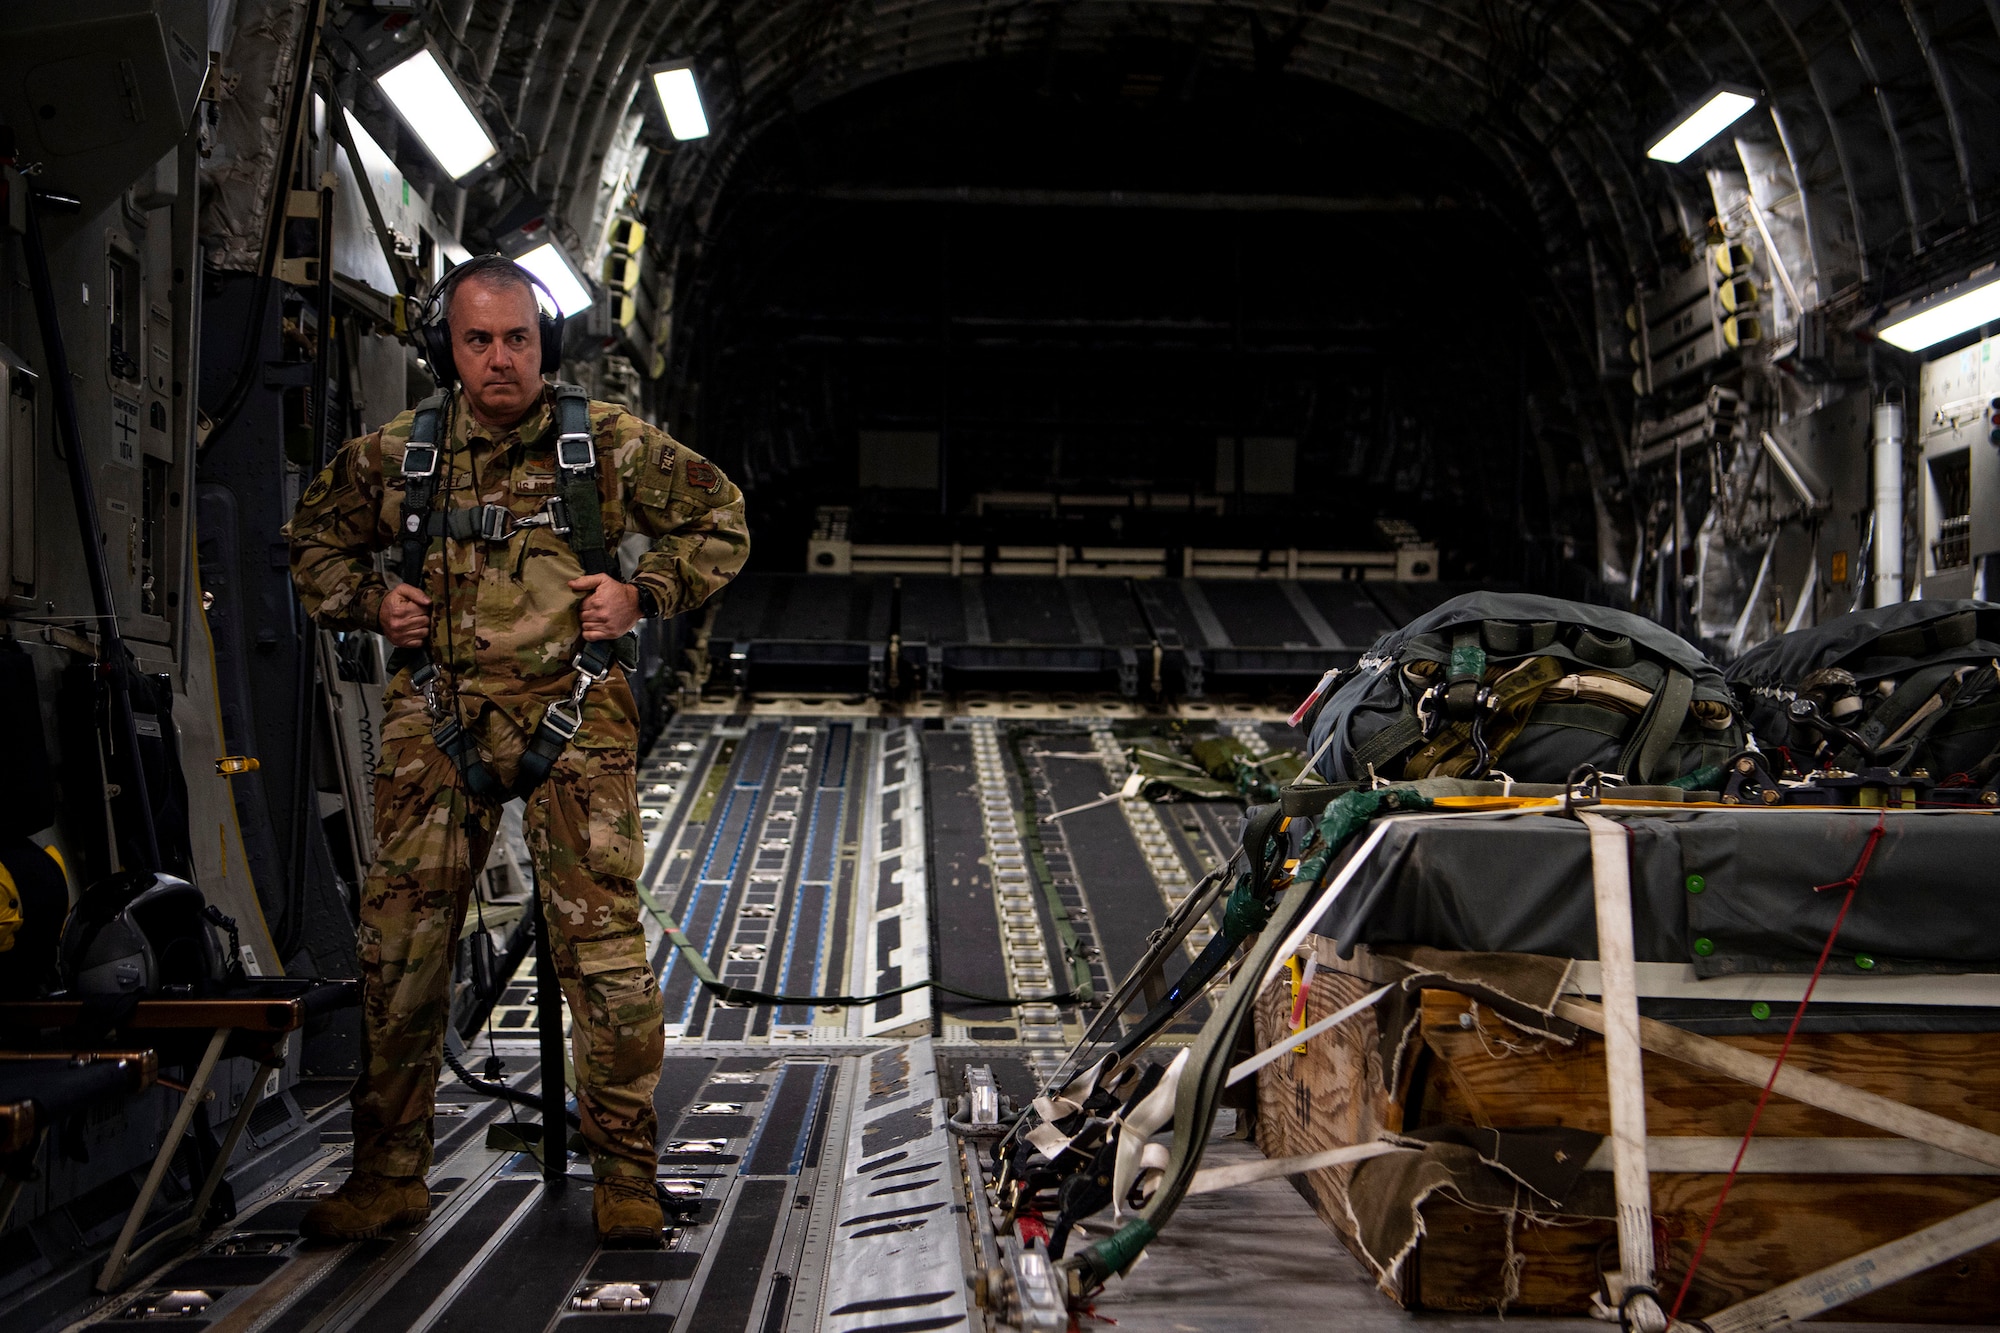 An Airman from the 791st Airlift Squadron adjusts his harness on a C-17 Globemaster III above North Field North, S.C., Jan. 15, 2021.